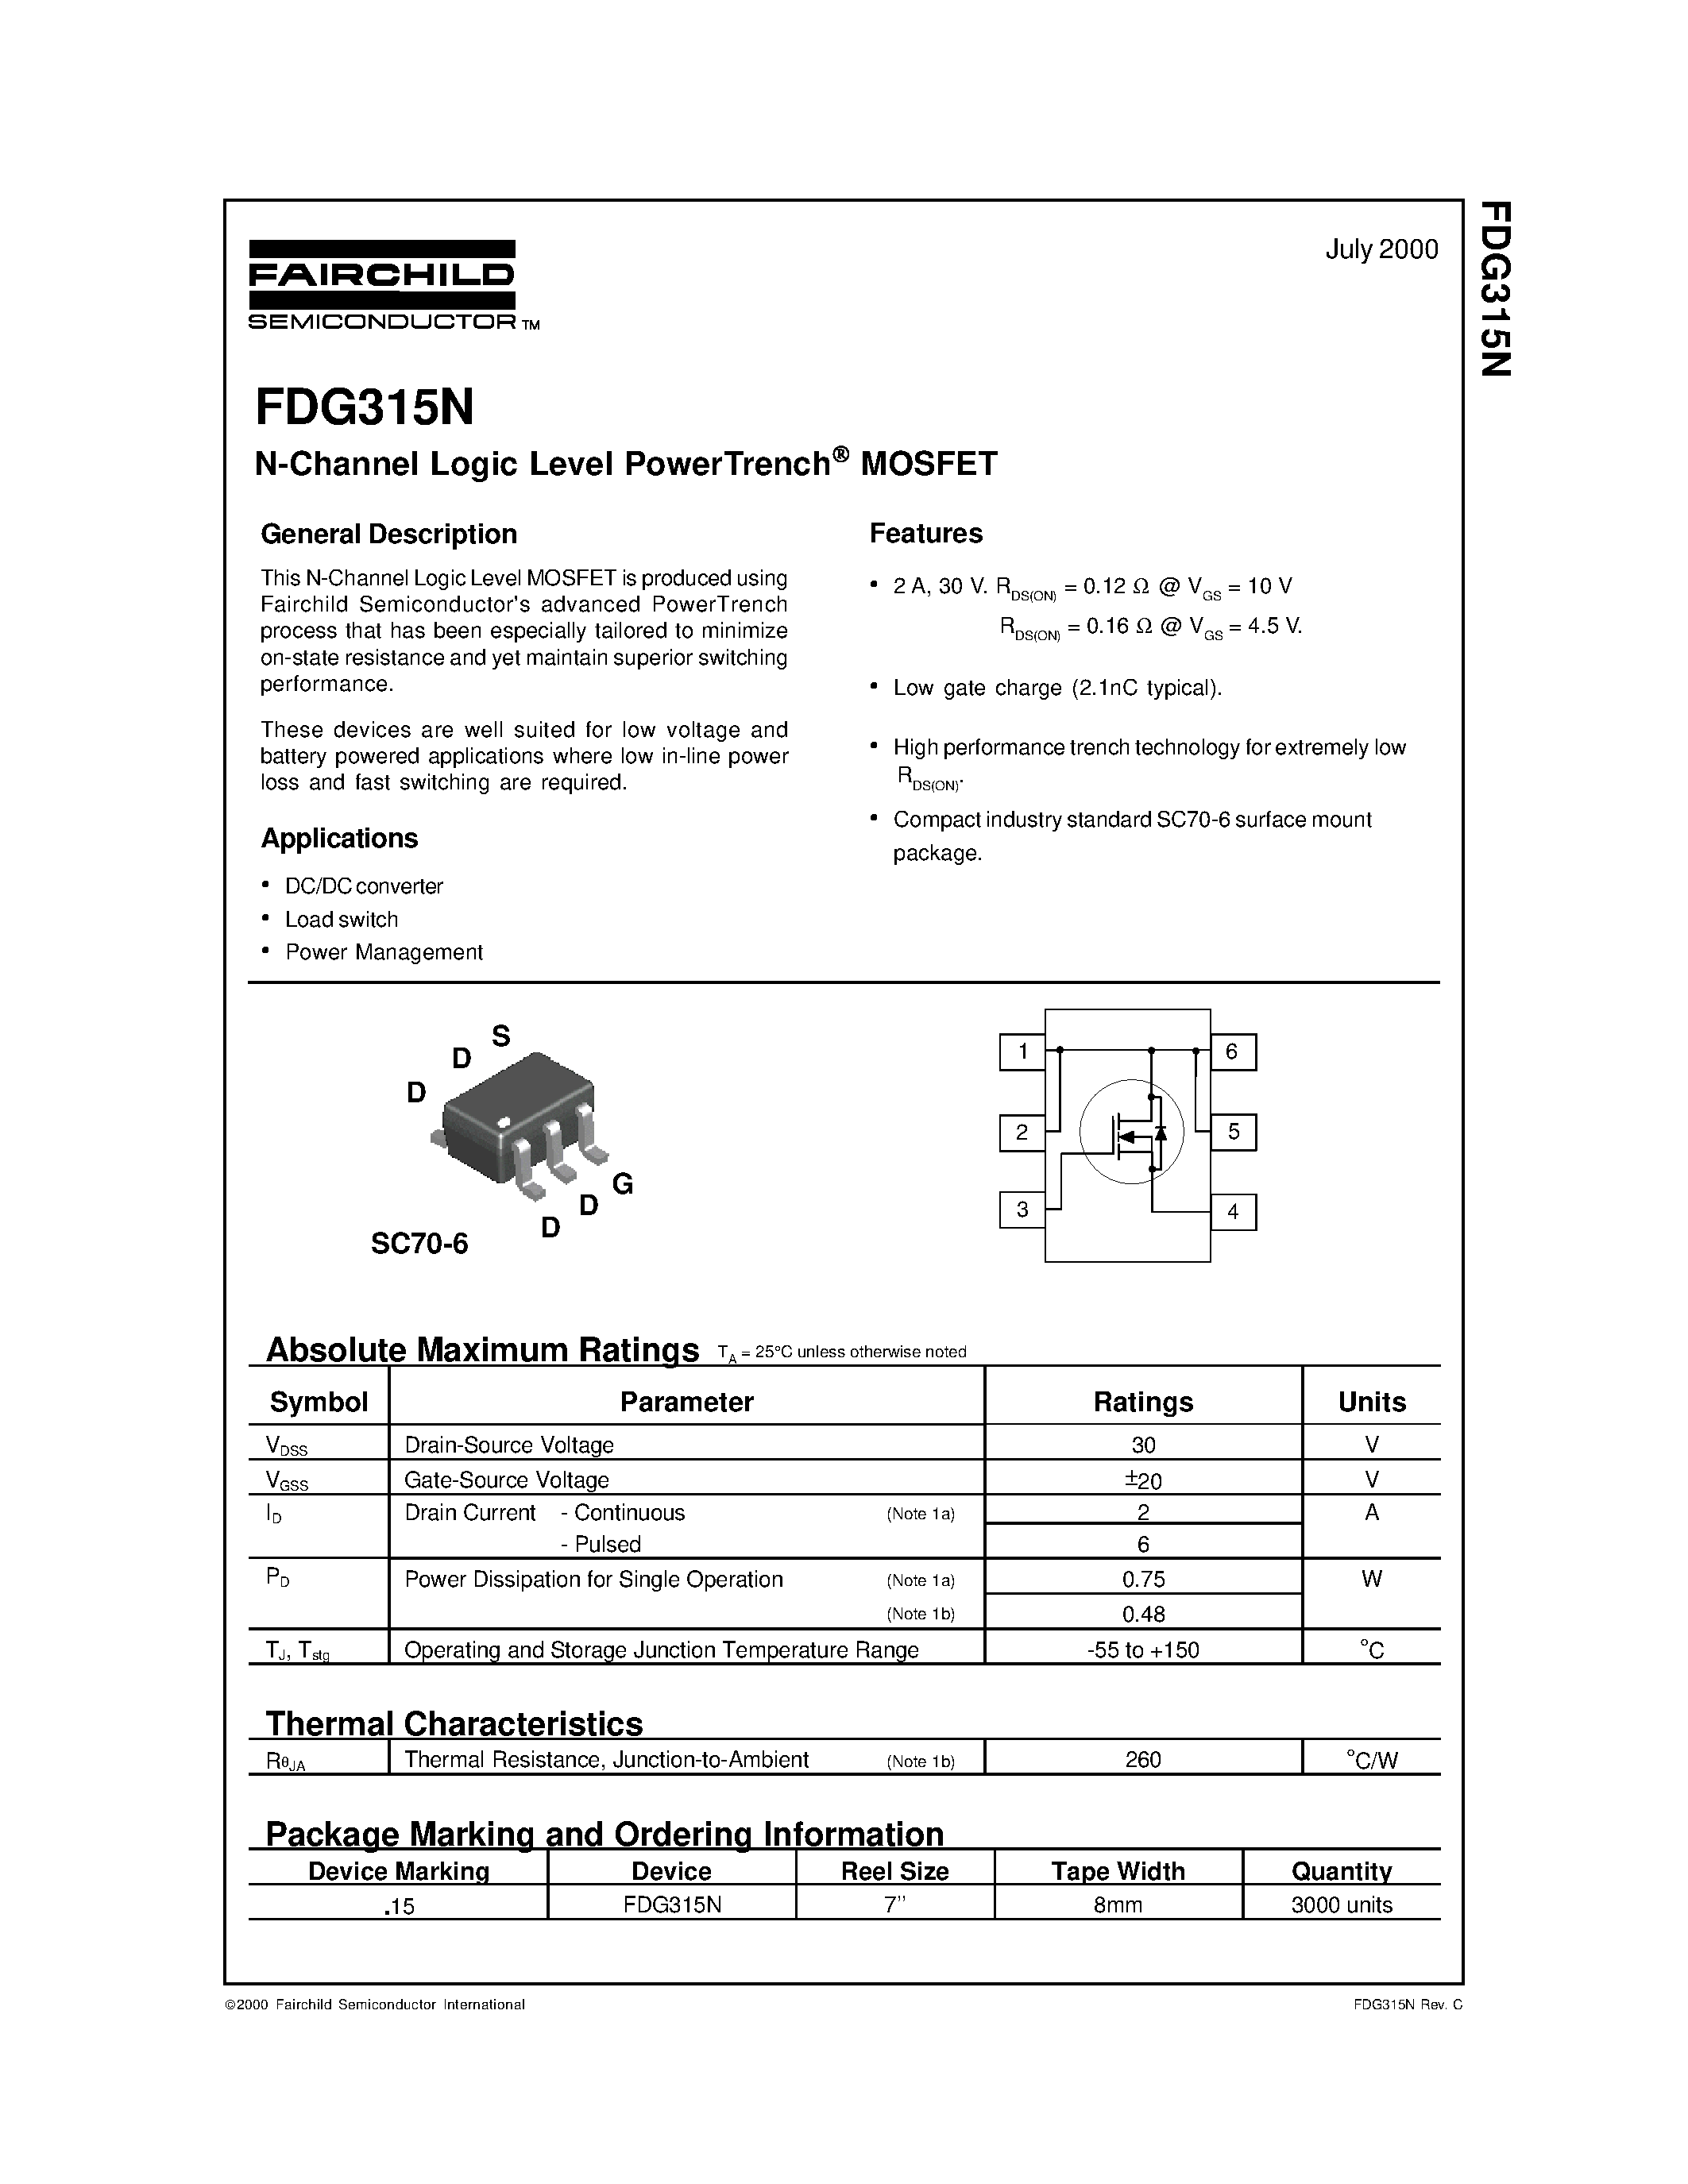 Даташит FDG315N-N-Channel Logic Level PowerTrench MOSFET страница 1